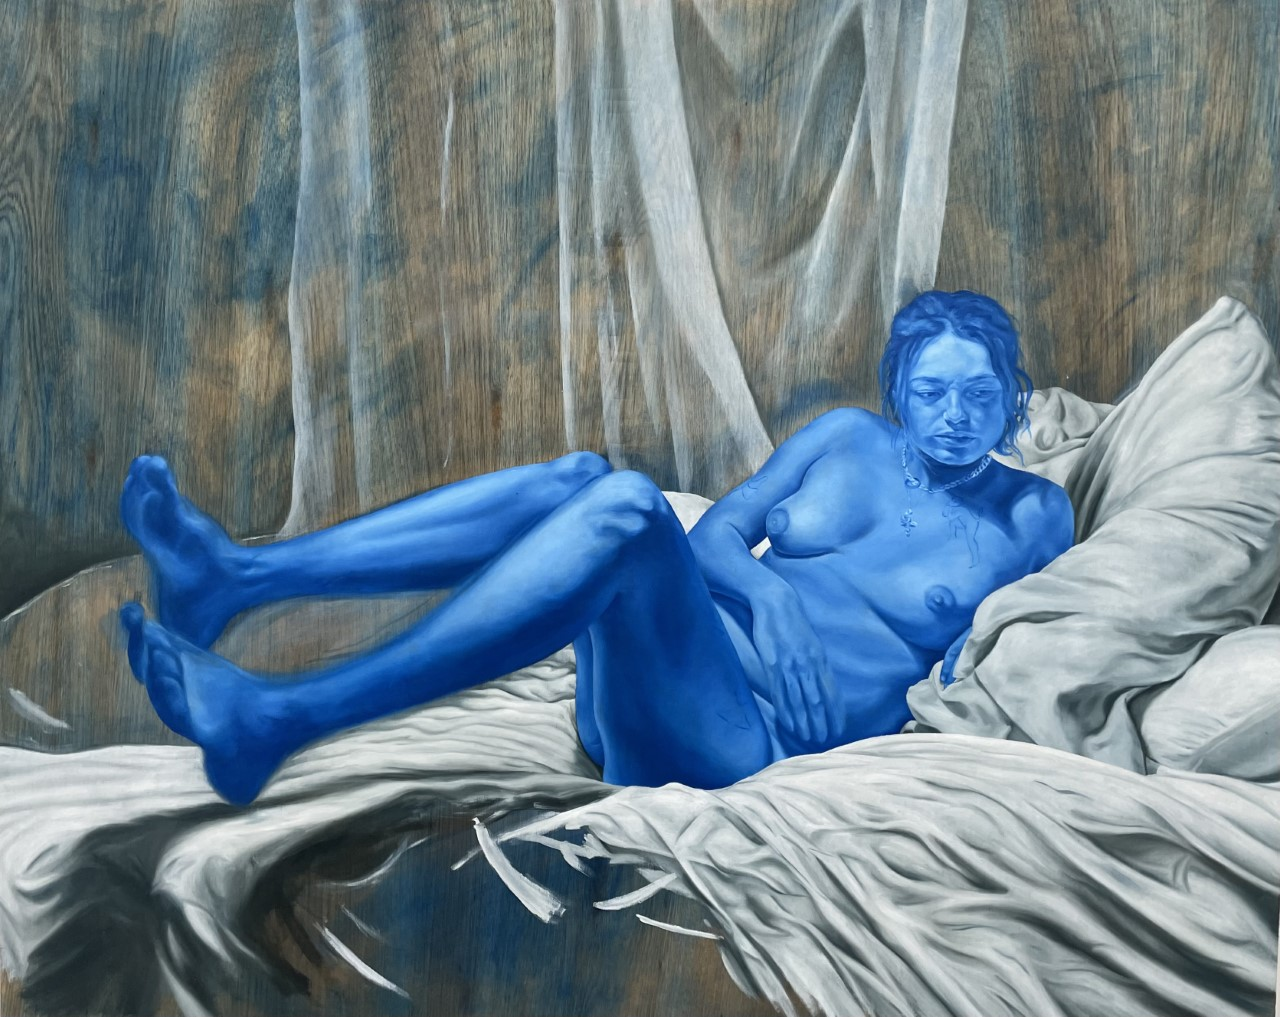 A painting of a blue woman, naked on a bed.